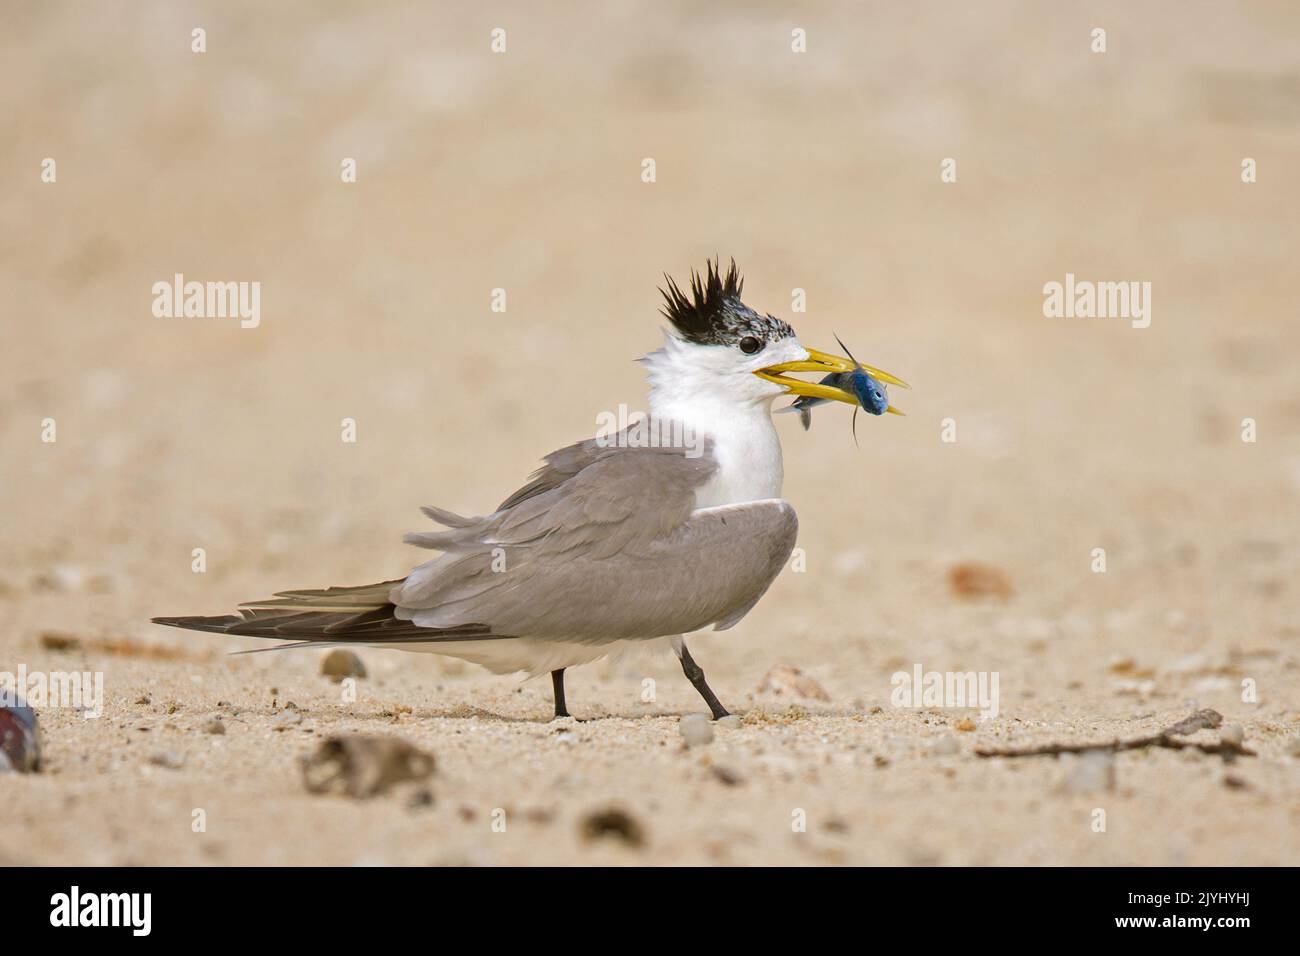 greater crested tern (Thalasseus bergii, Sterna bergii), on the beach with caught fish in the bill, Australia, Queensland Stock Photo